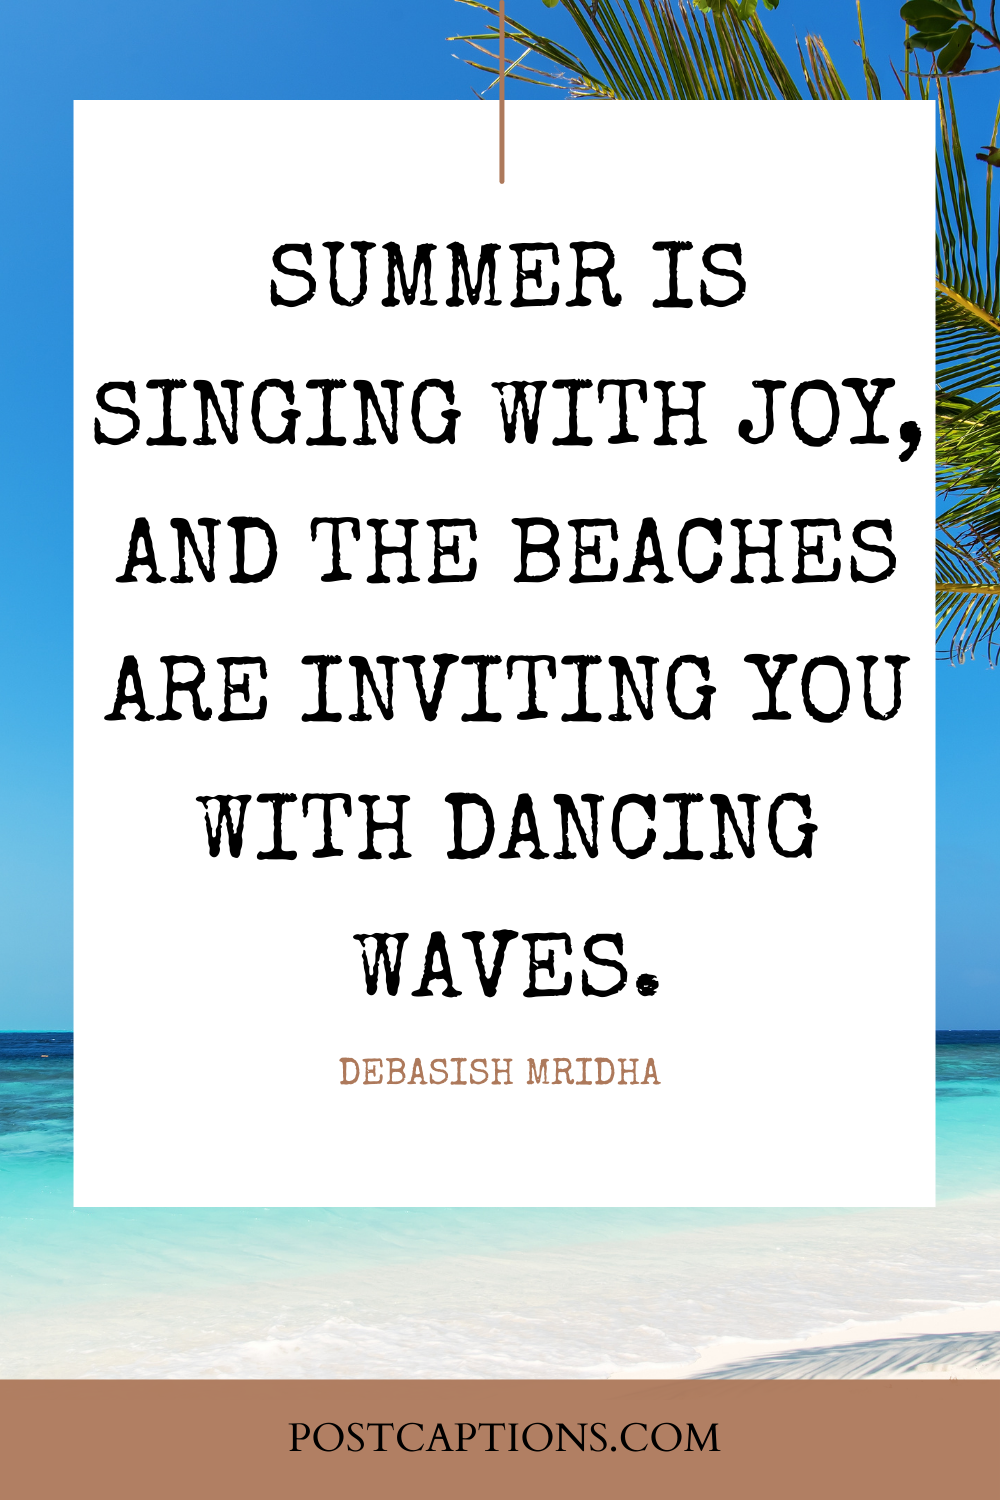 Cute summer quotes for Instagram